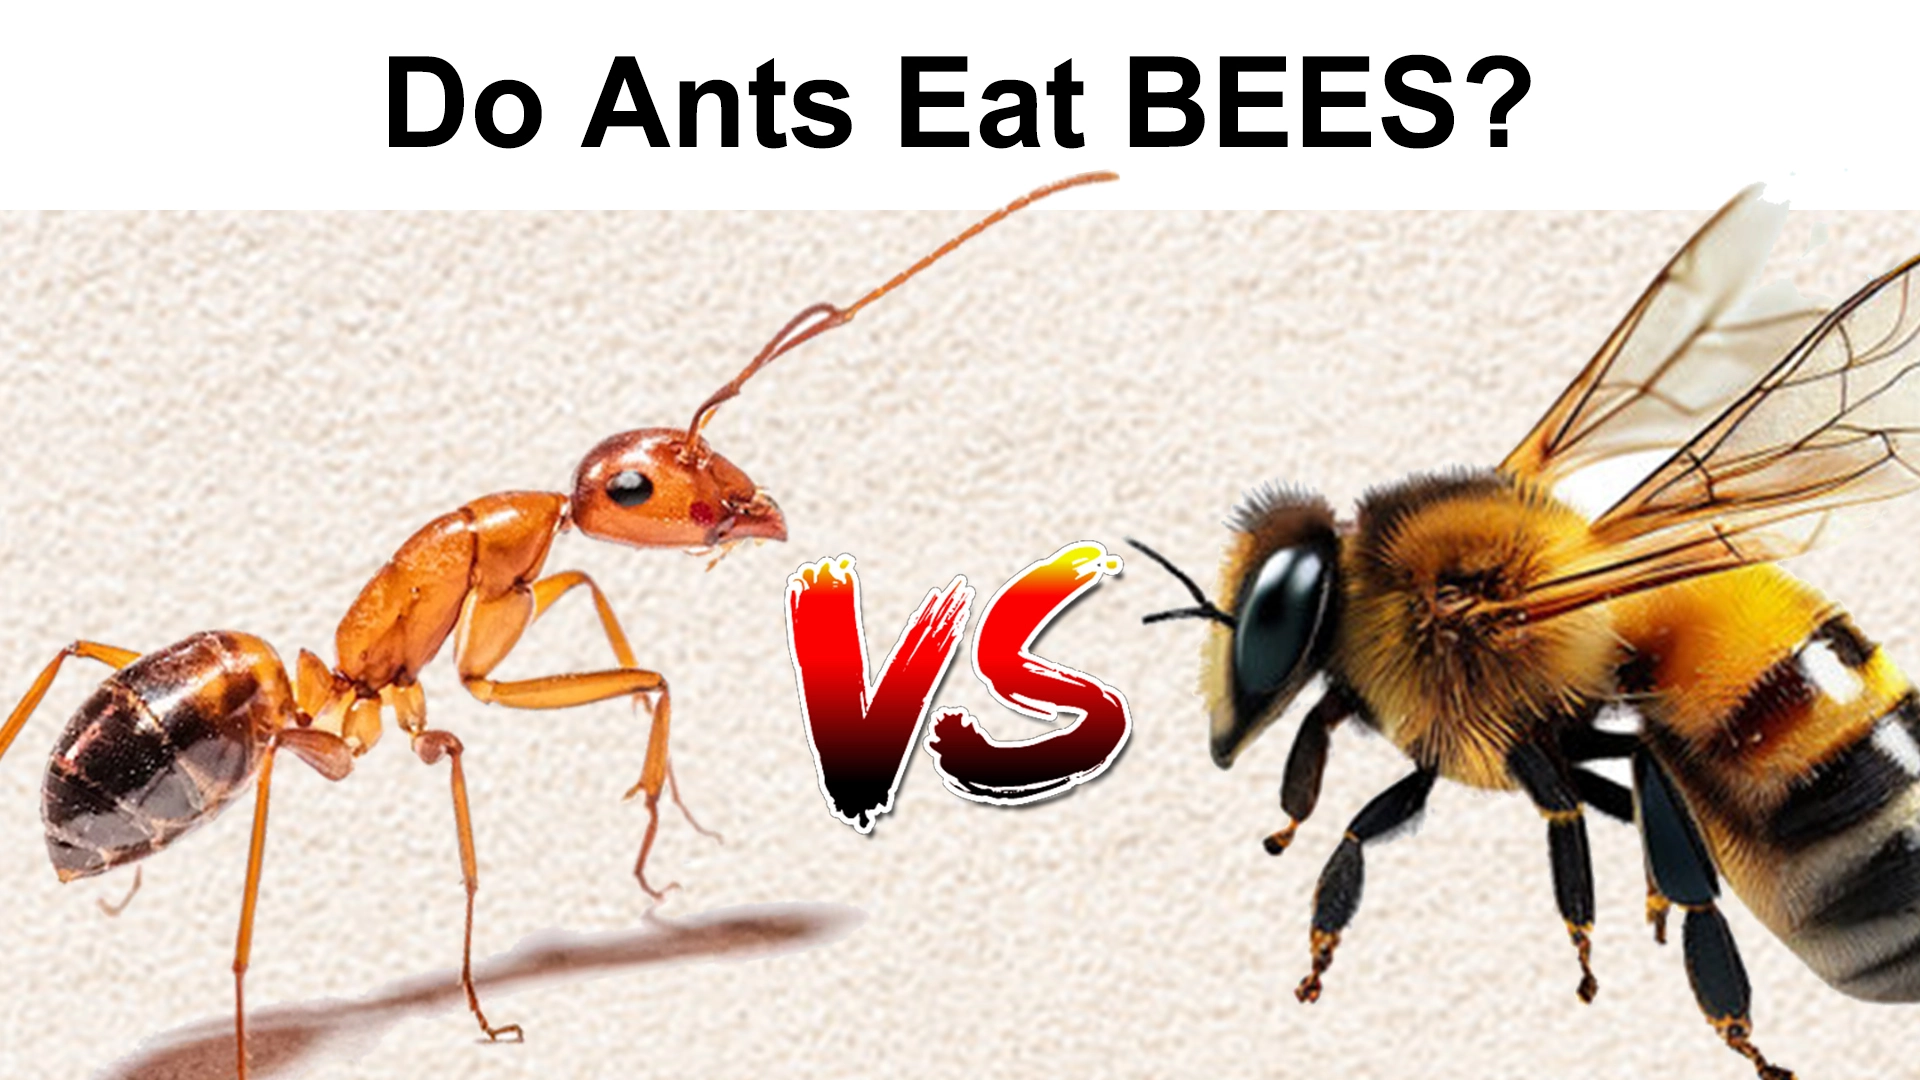 Do Ants Eat Bees?